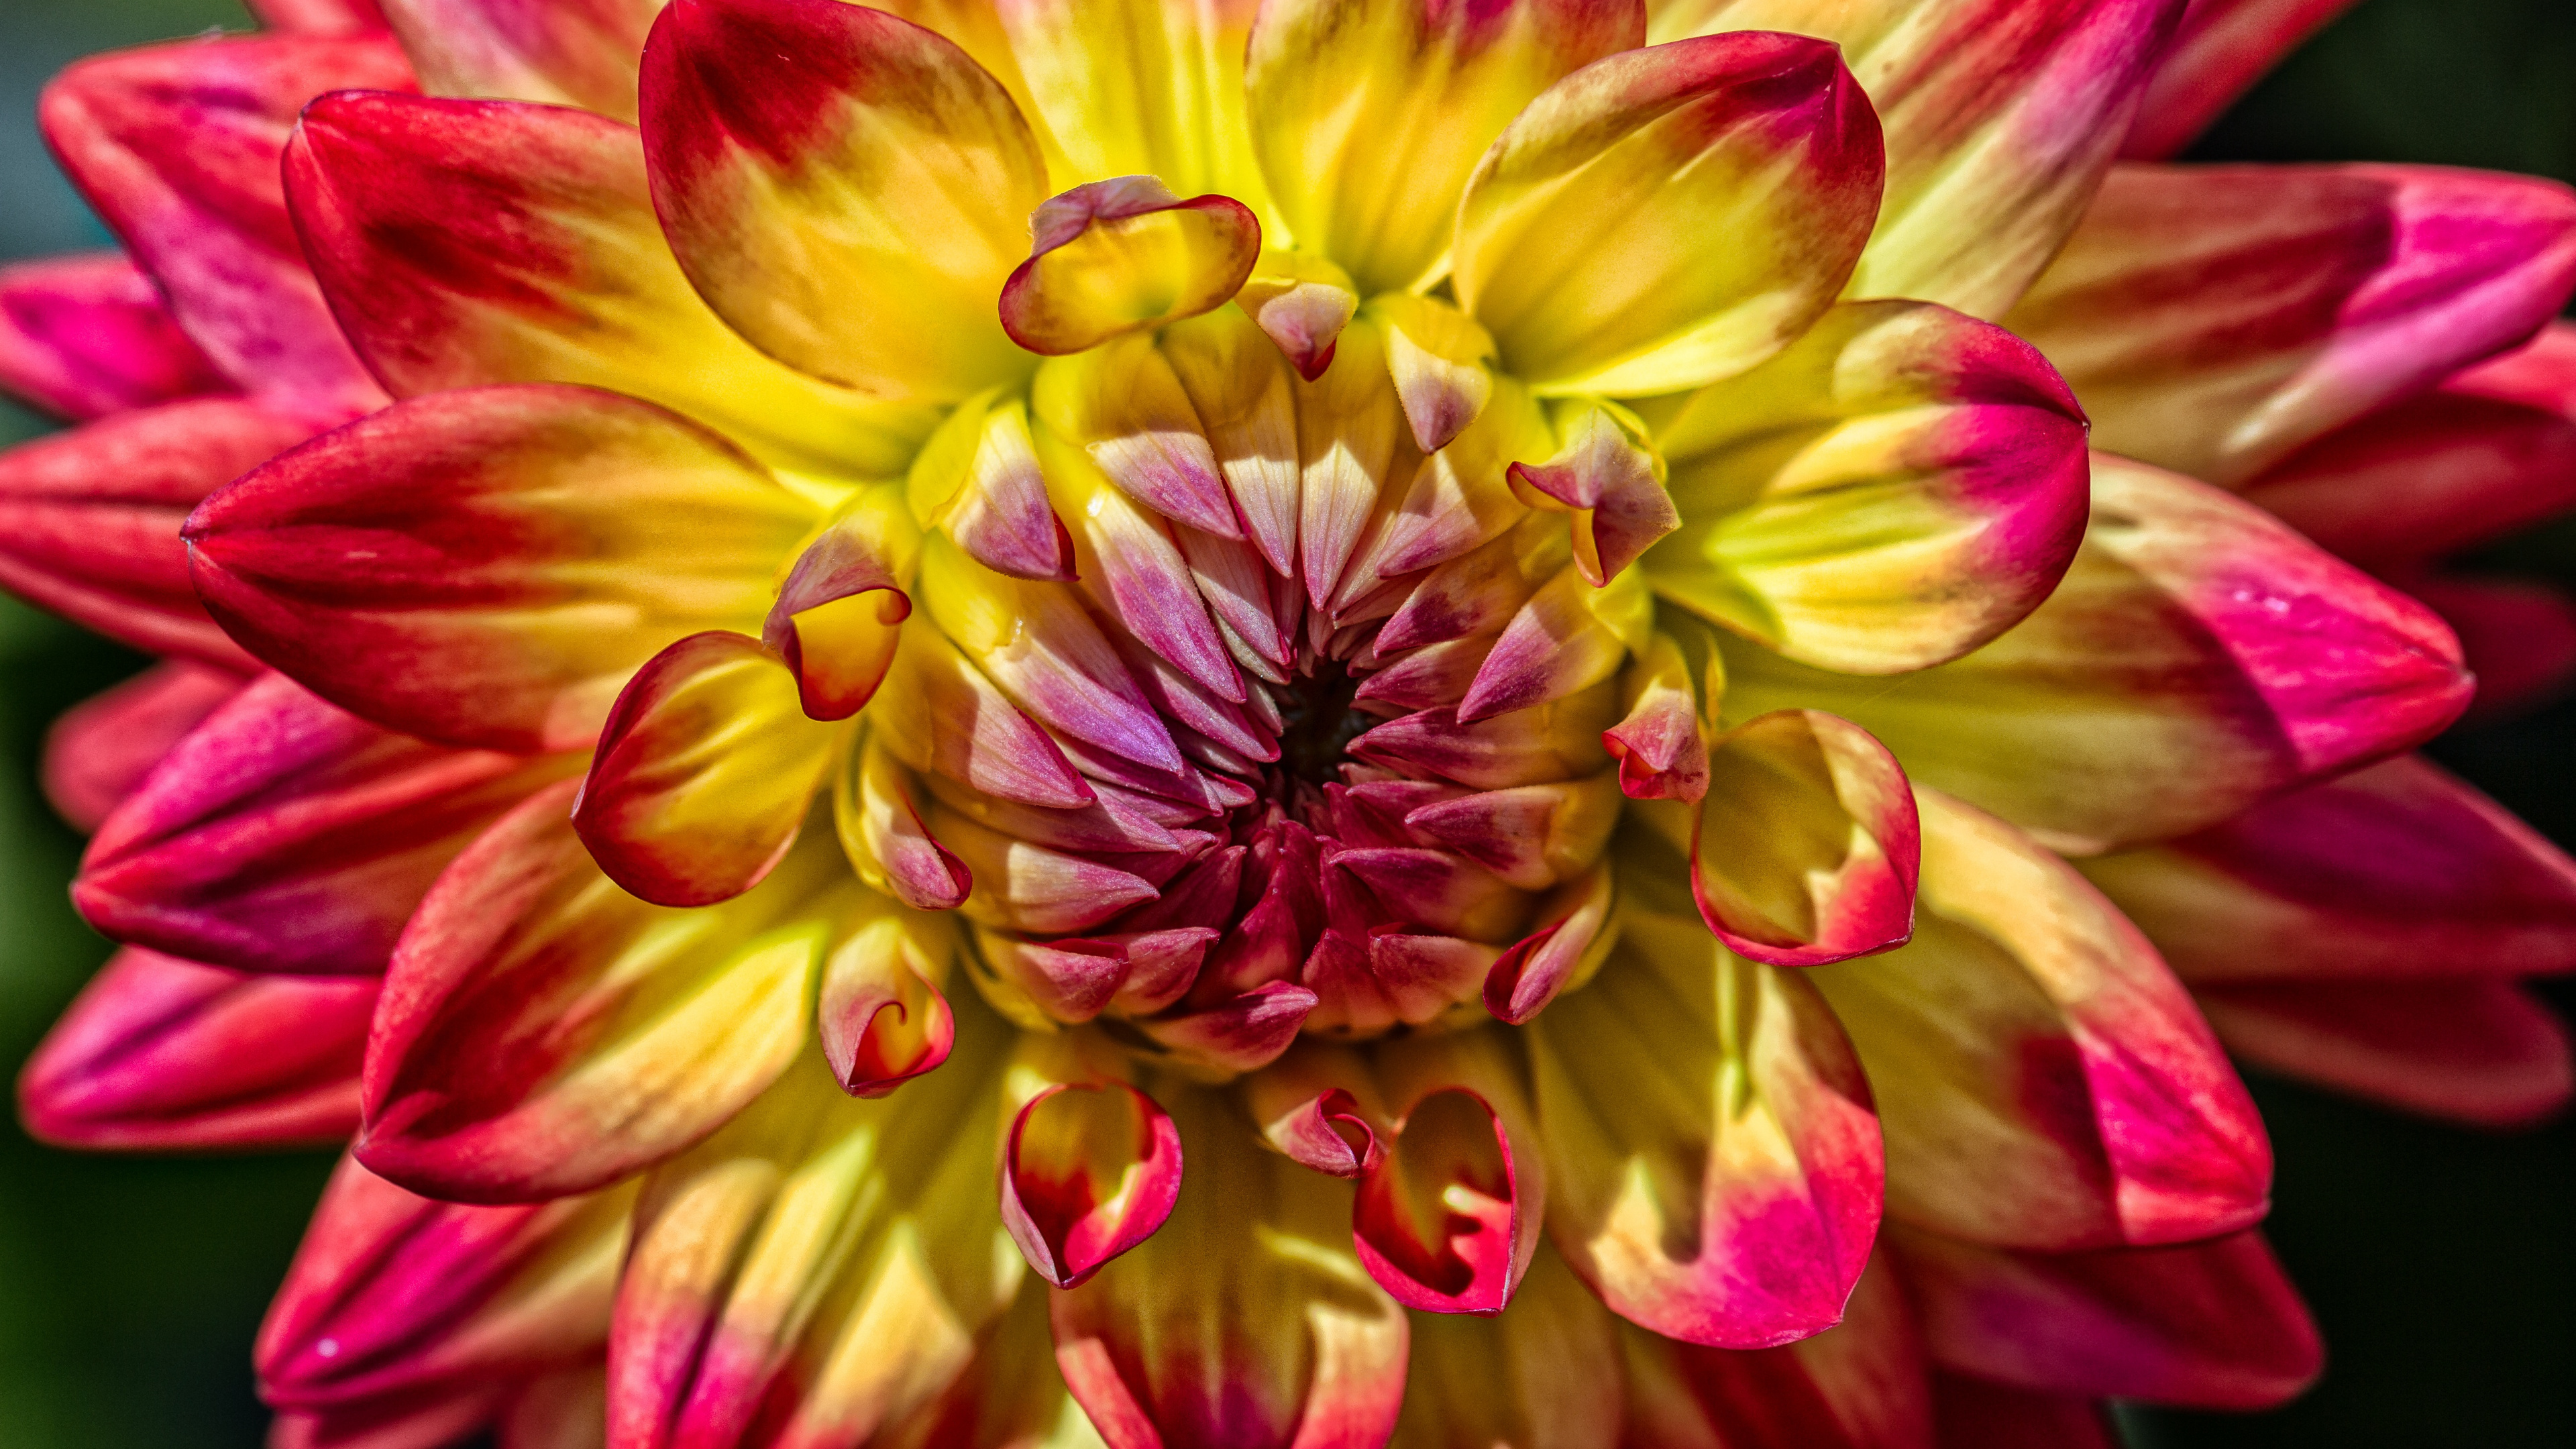 Pink and Yellow Flower in Macro Photography. Wallpaper in 3840x2160 Resolution